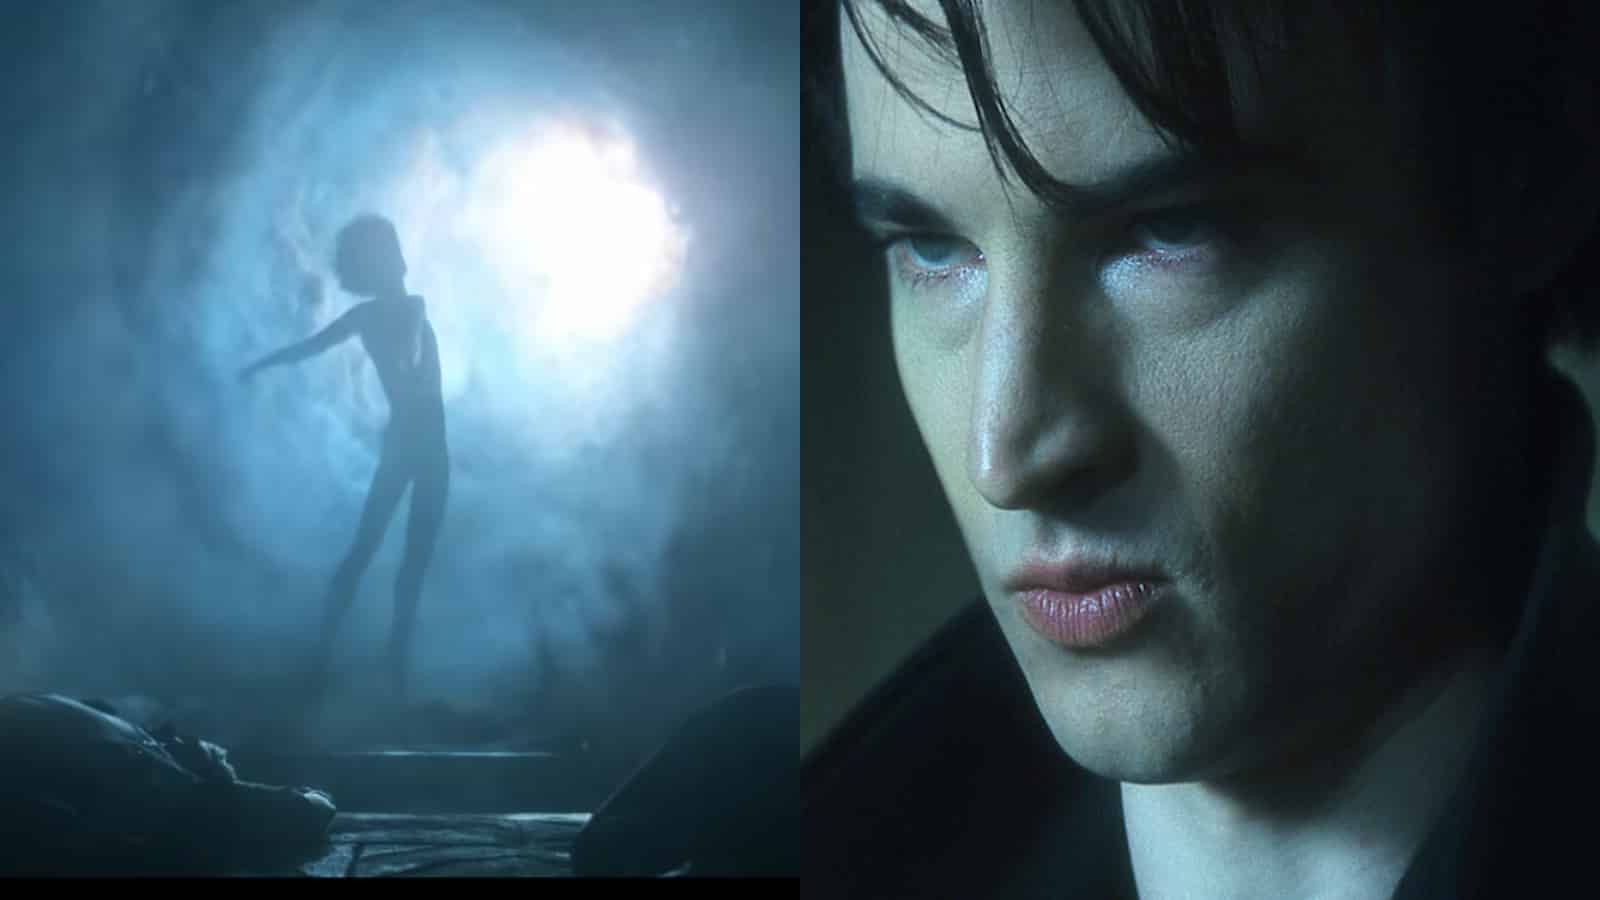 Two images from Netflix's The Sandman trailer